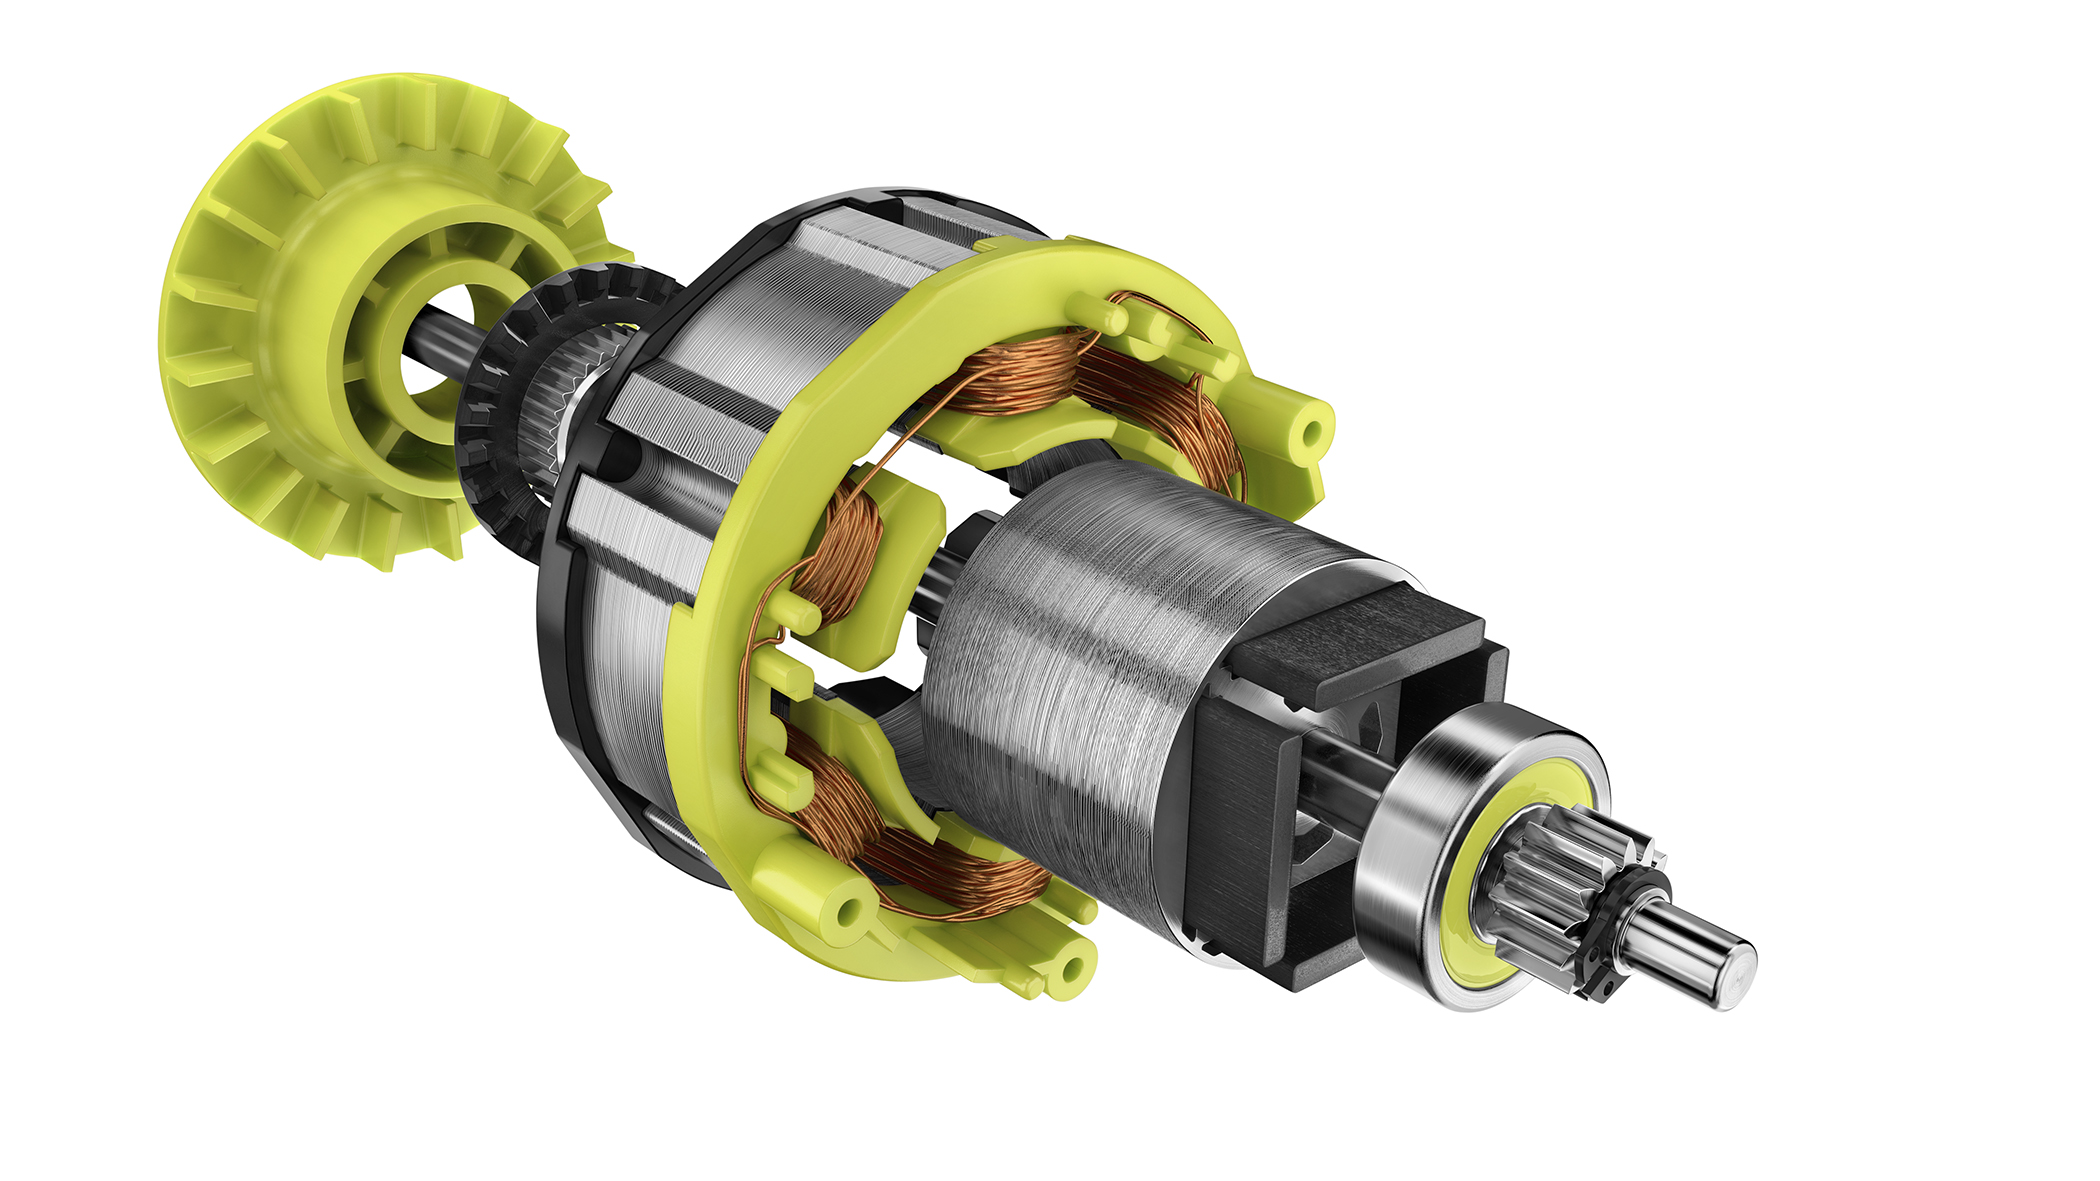 Photo: Up to 20% Faster Drilling and Up to 50% More Torque